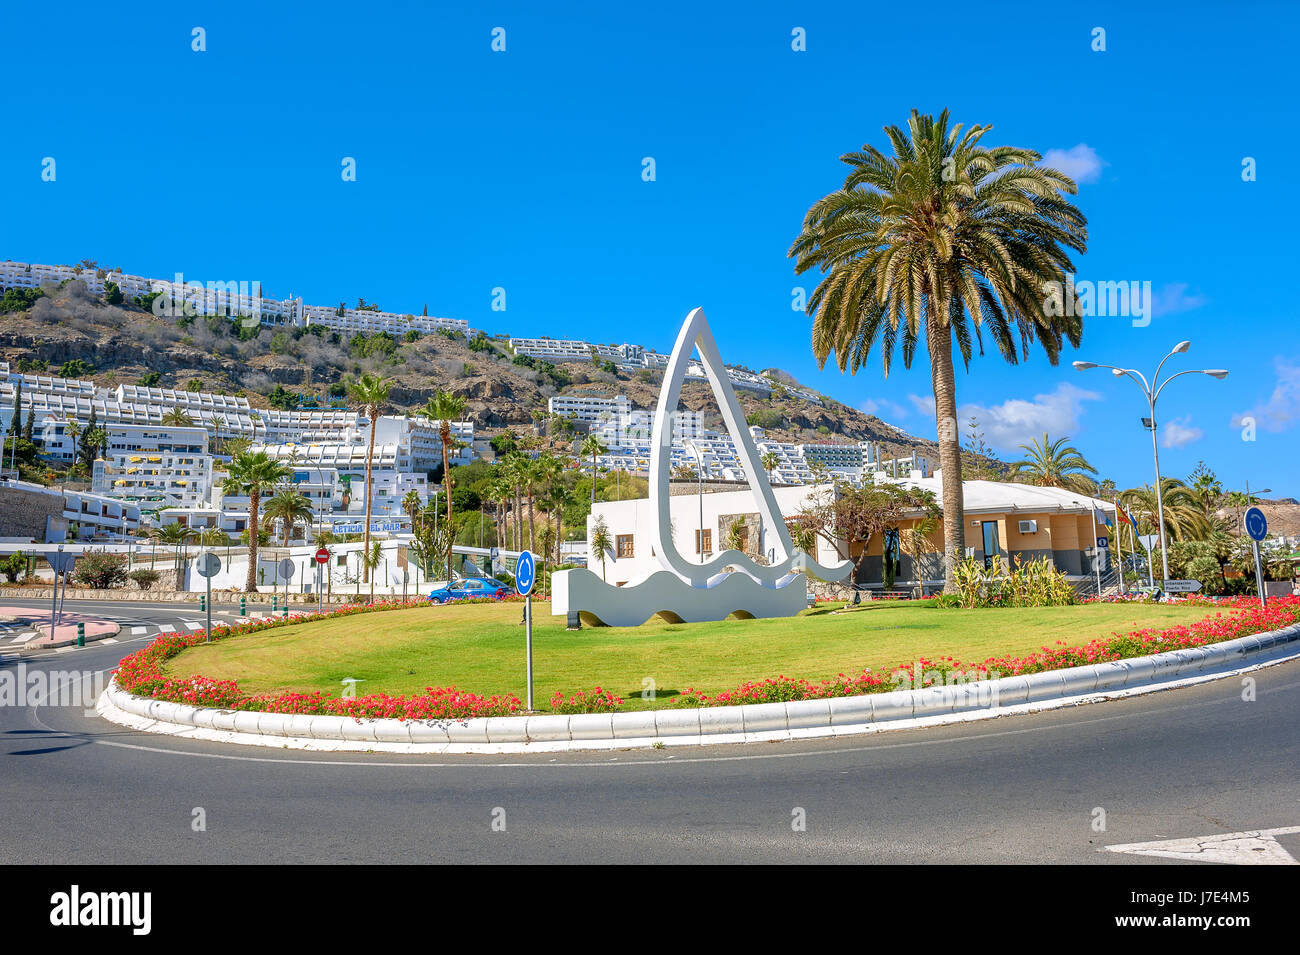 Cityscape and traffic roundabout with stylish marine image. PuertoRico, Gran Canaria, Canary islands Stock Photo